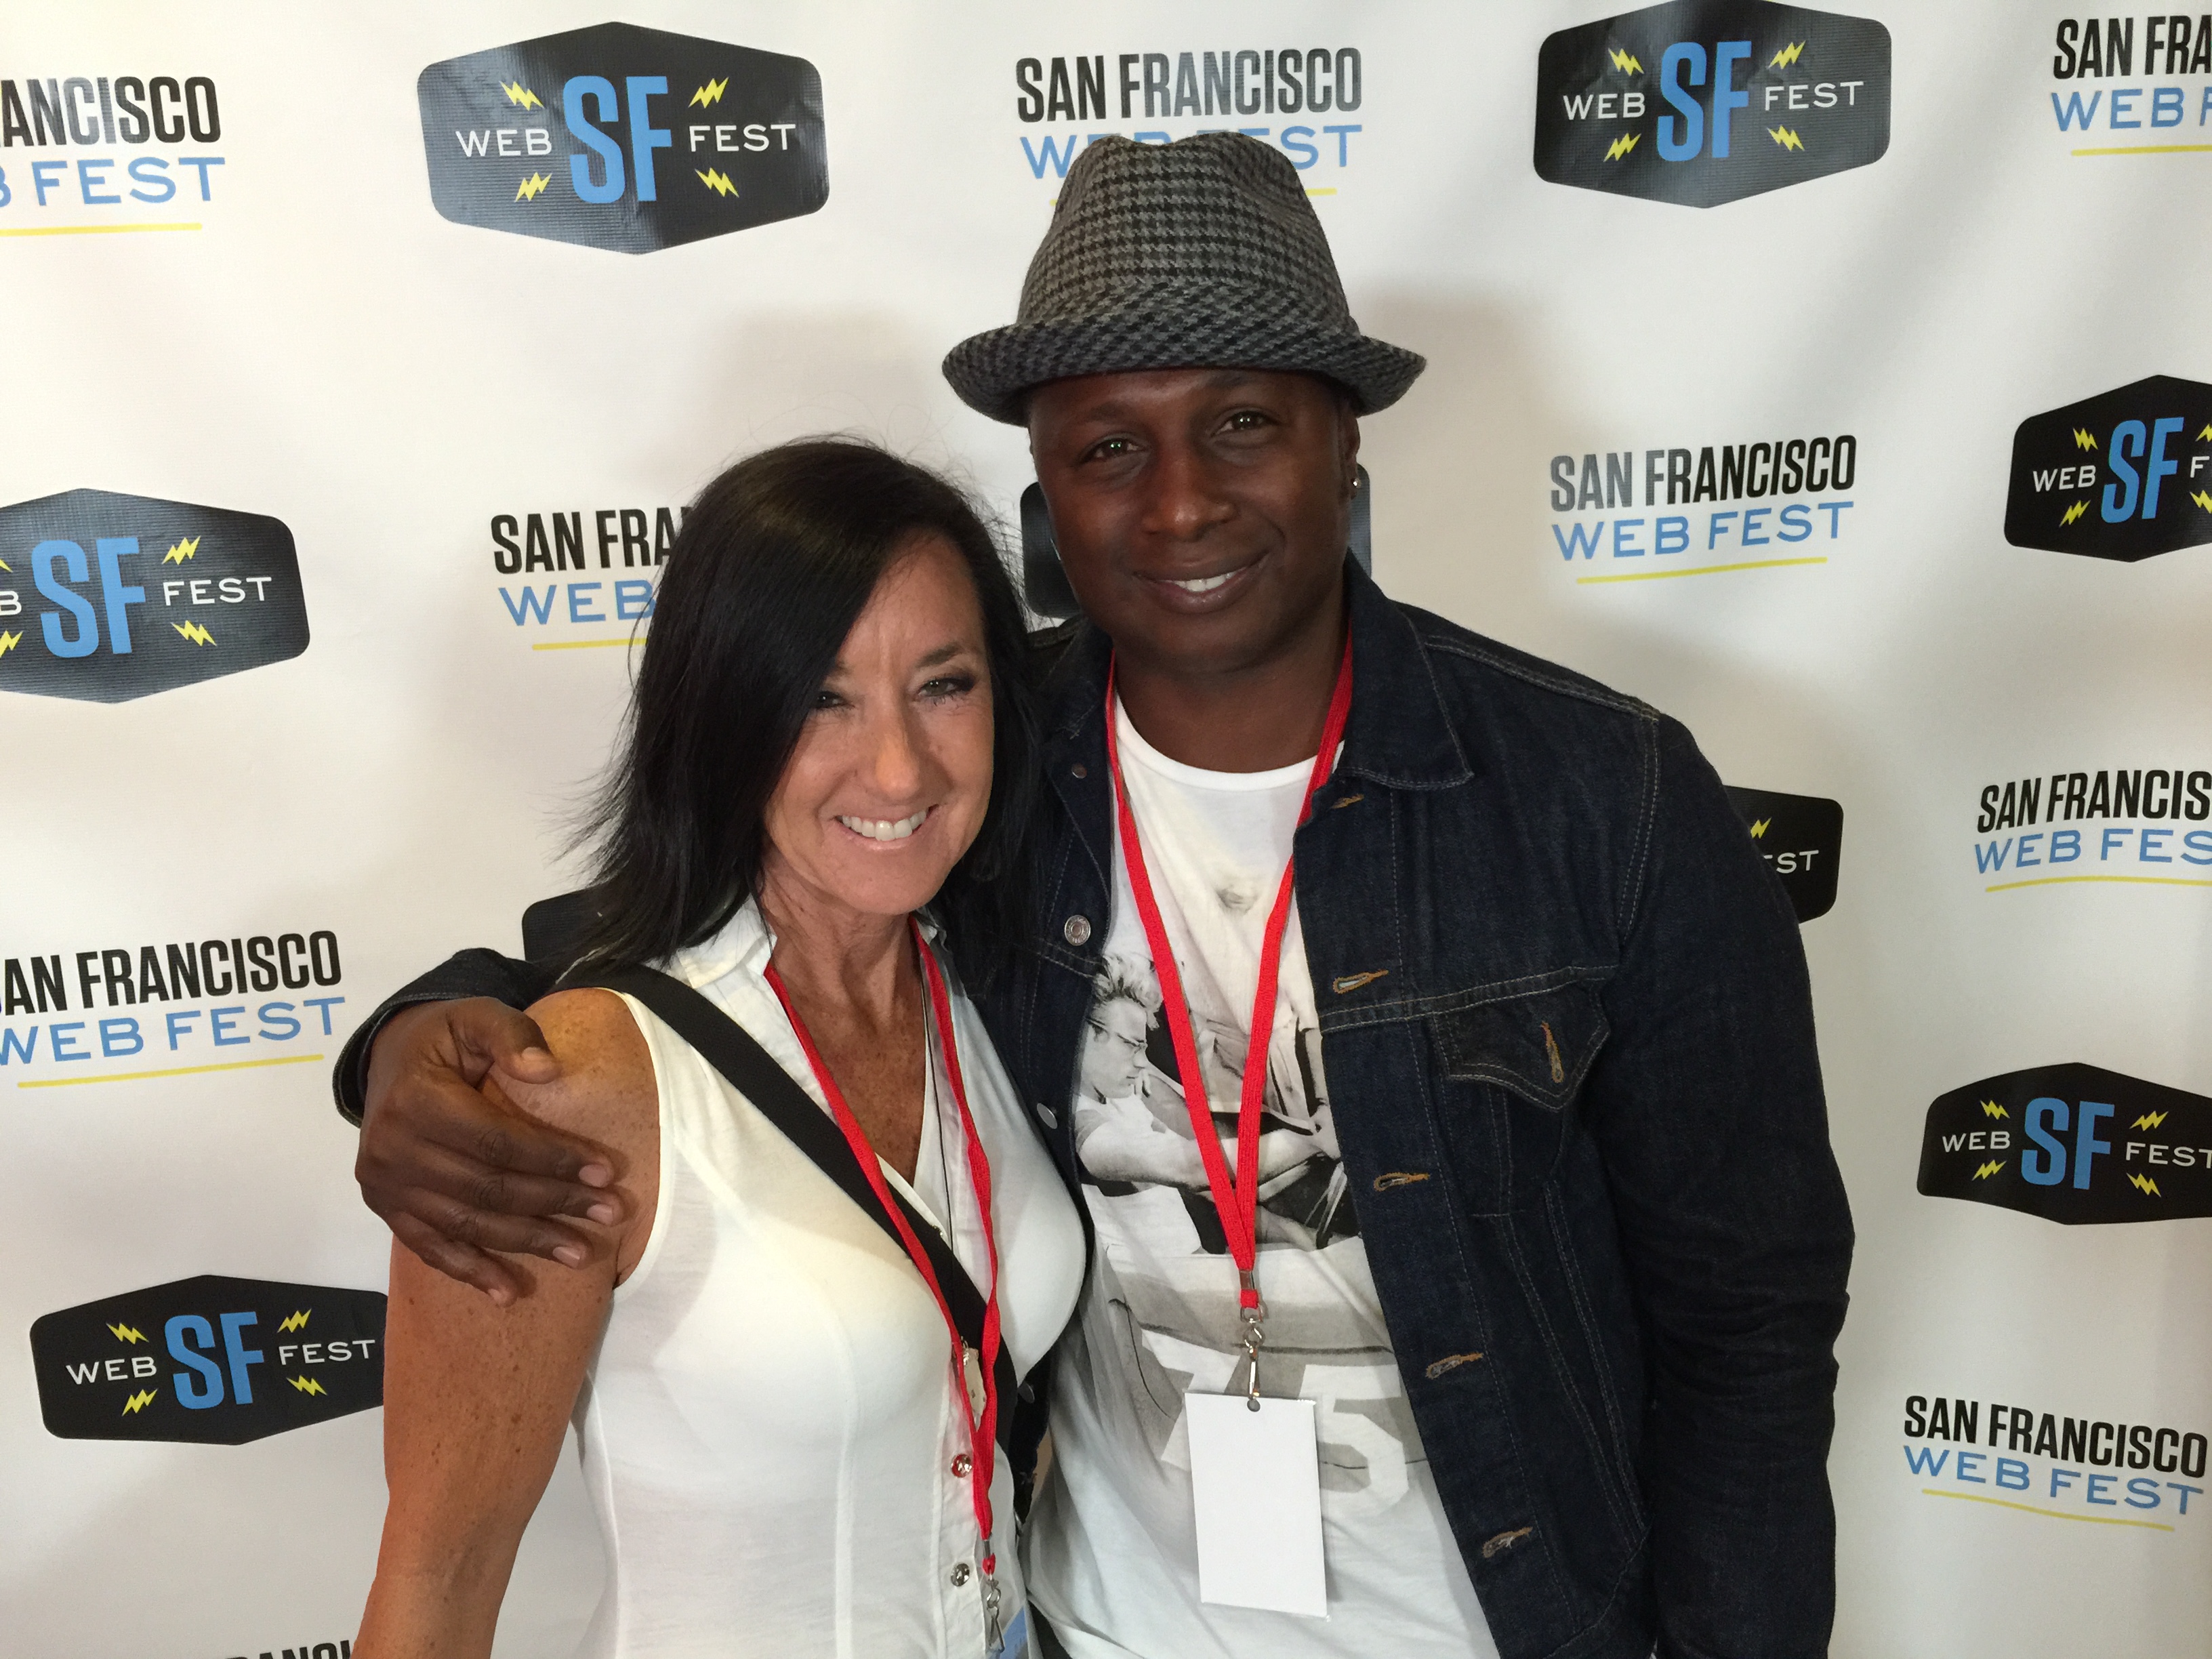 At the SF Web Fest 2015